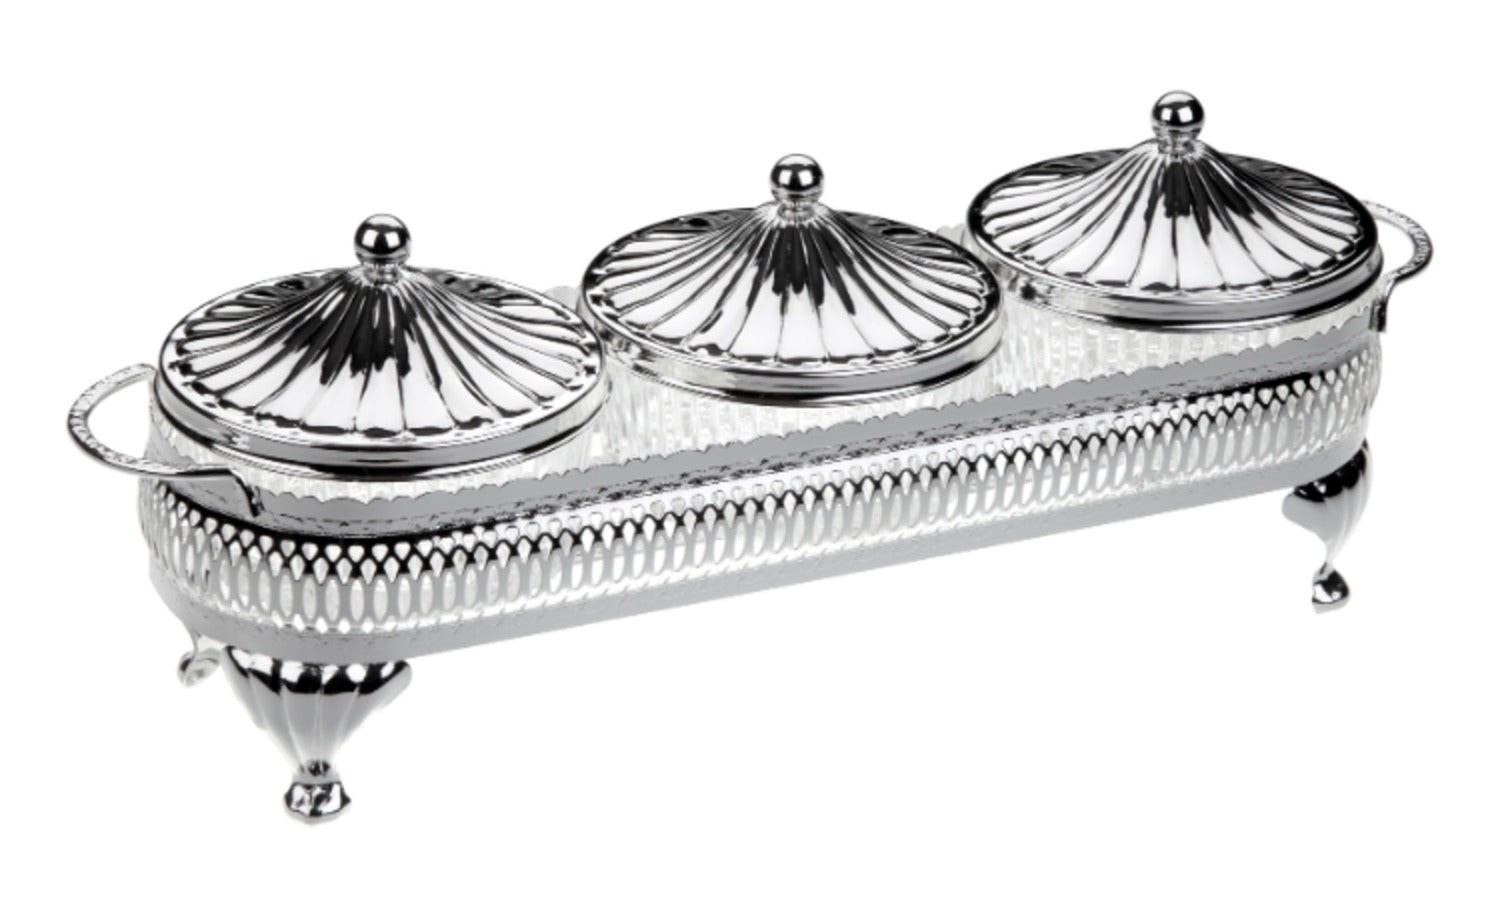 Queen Anne Round Bowl Set, 3 Pieces -31.5x11cm -Silver Plated